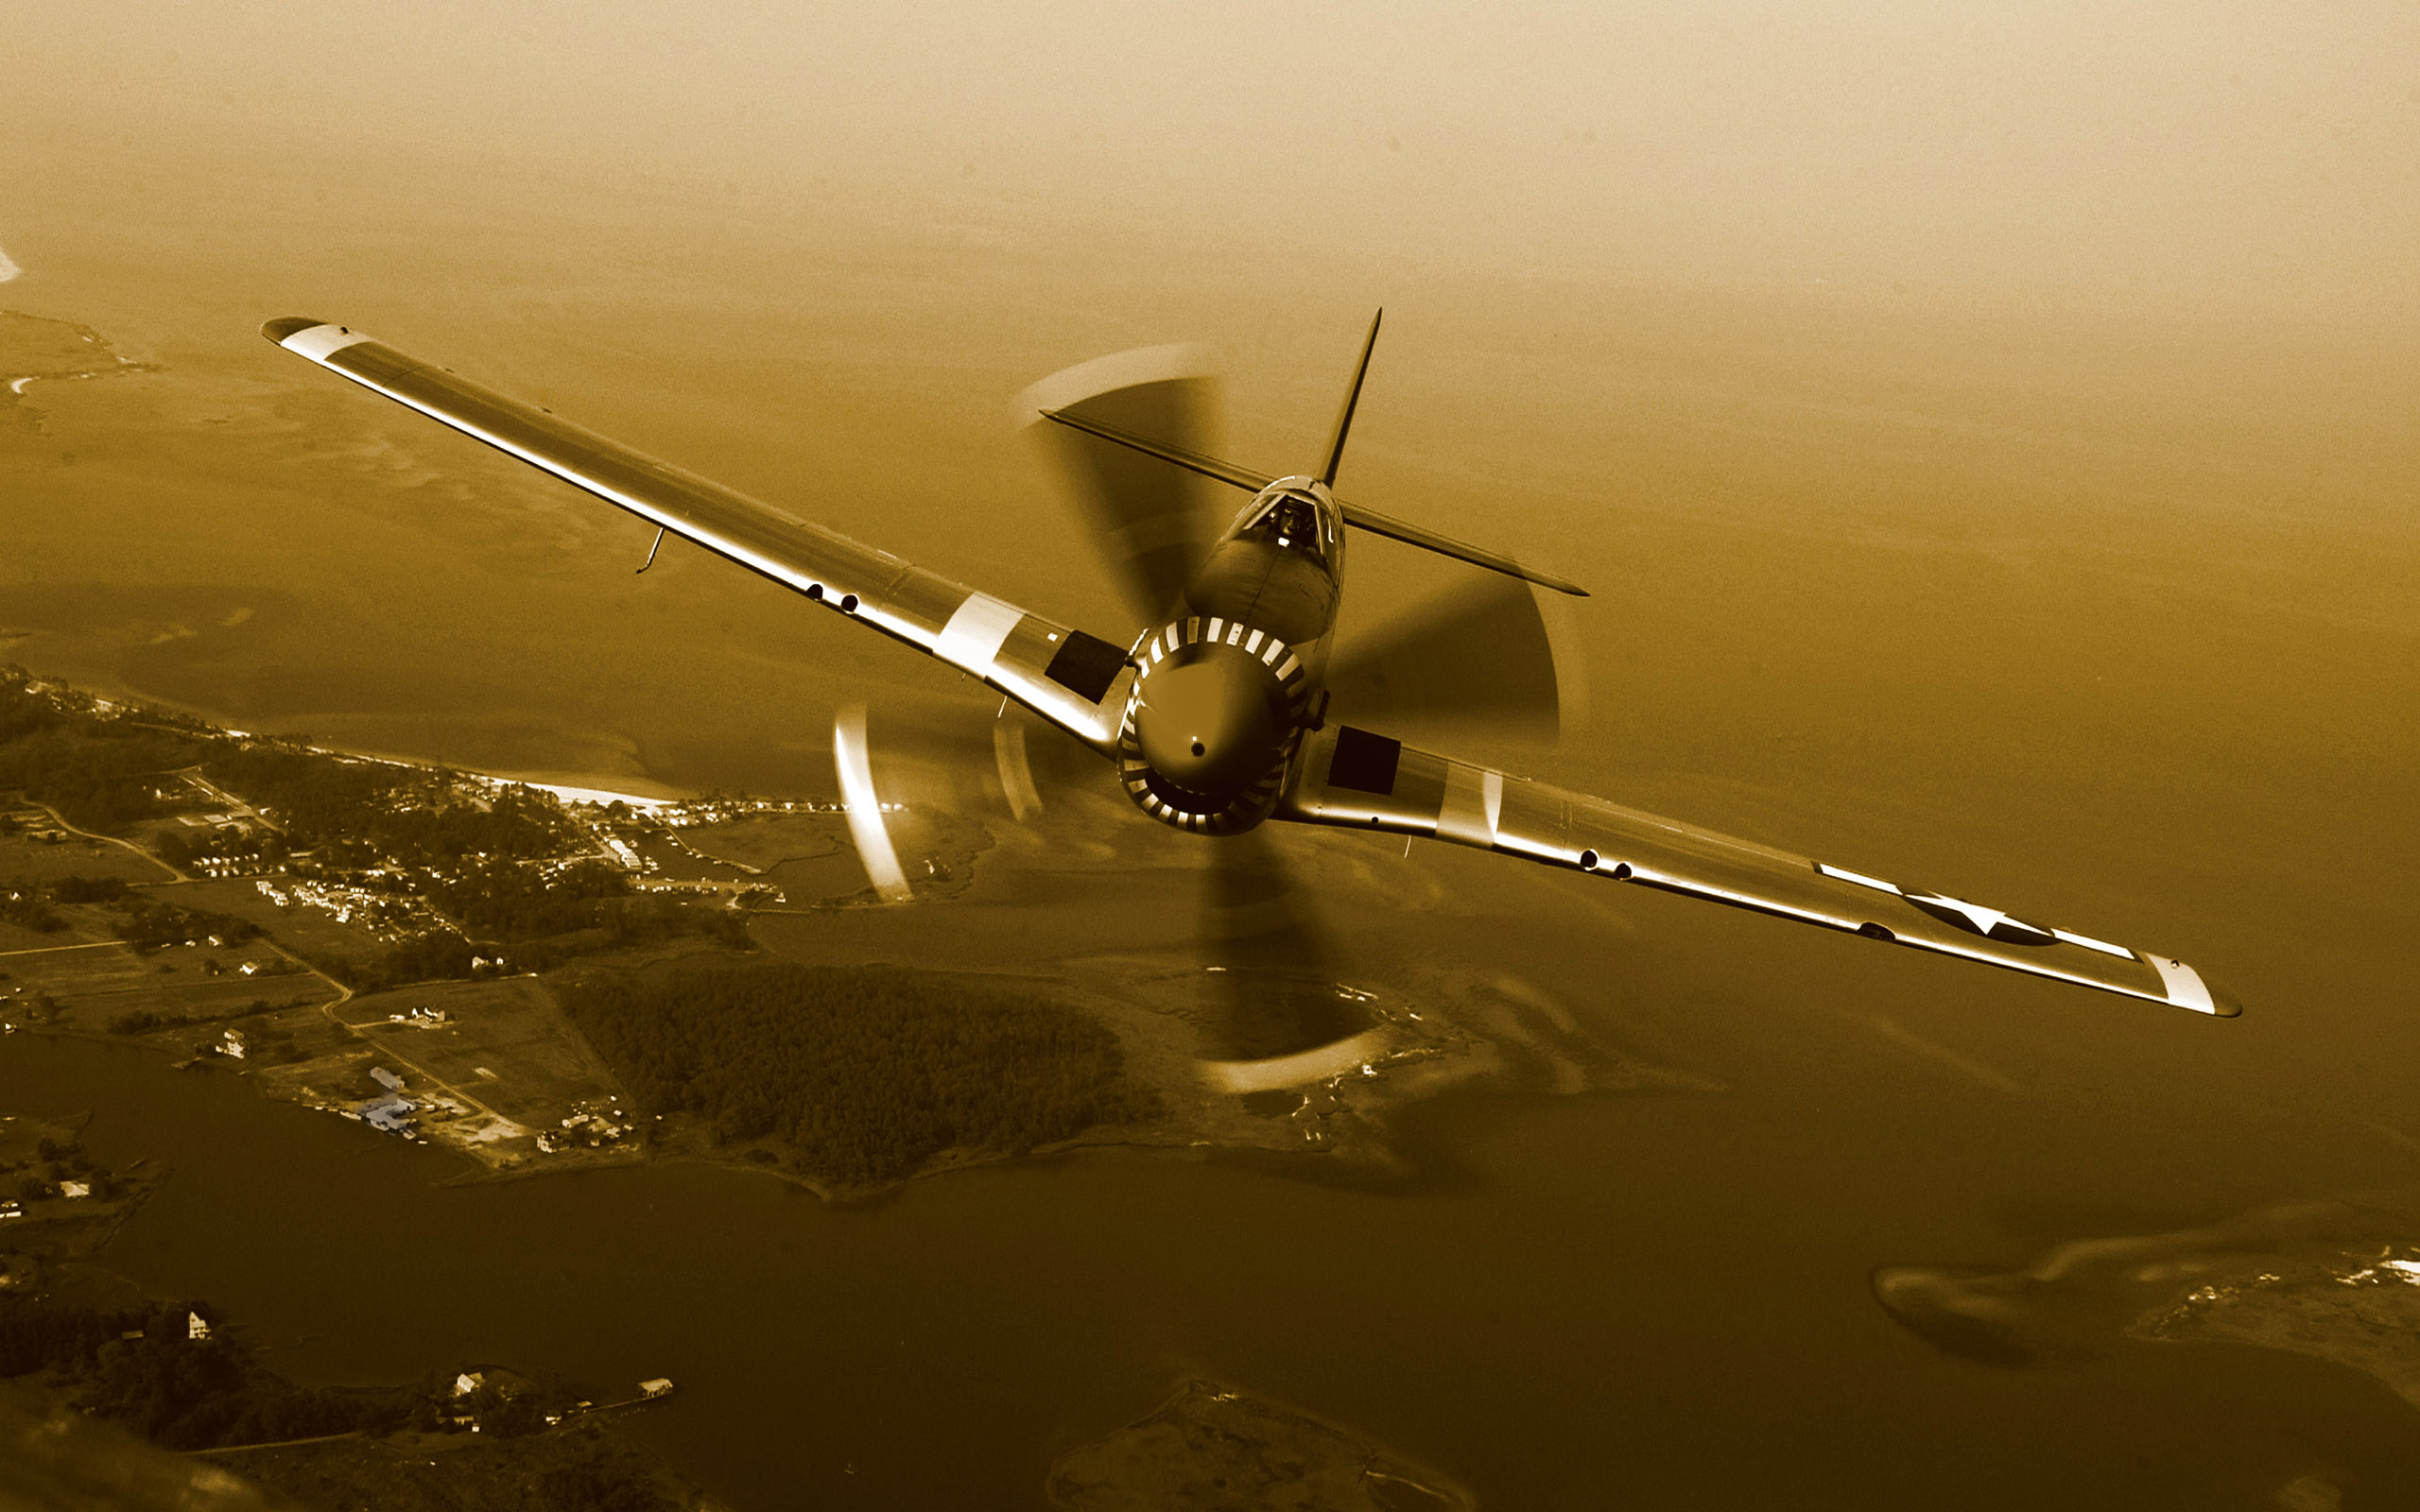 sepia, Vehicles, Aircrafts, Airplanes, Military, Fighter, Retro, Classic, Landscapes, Flight, Weapons, Pilot Wallpaper